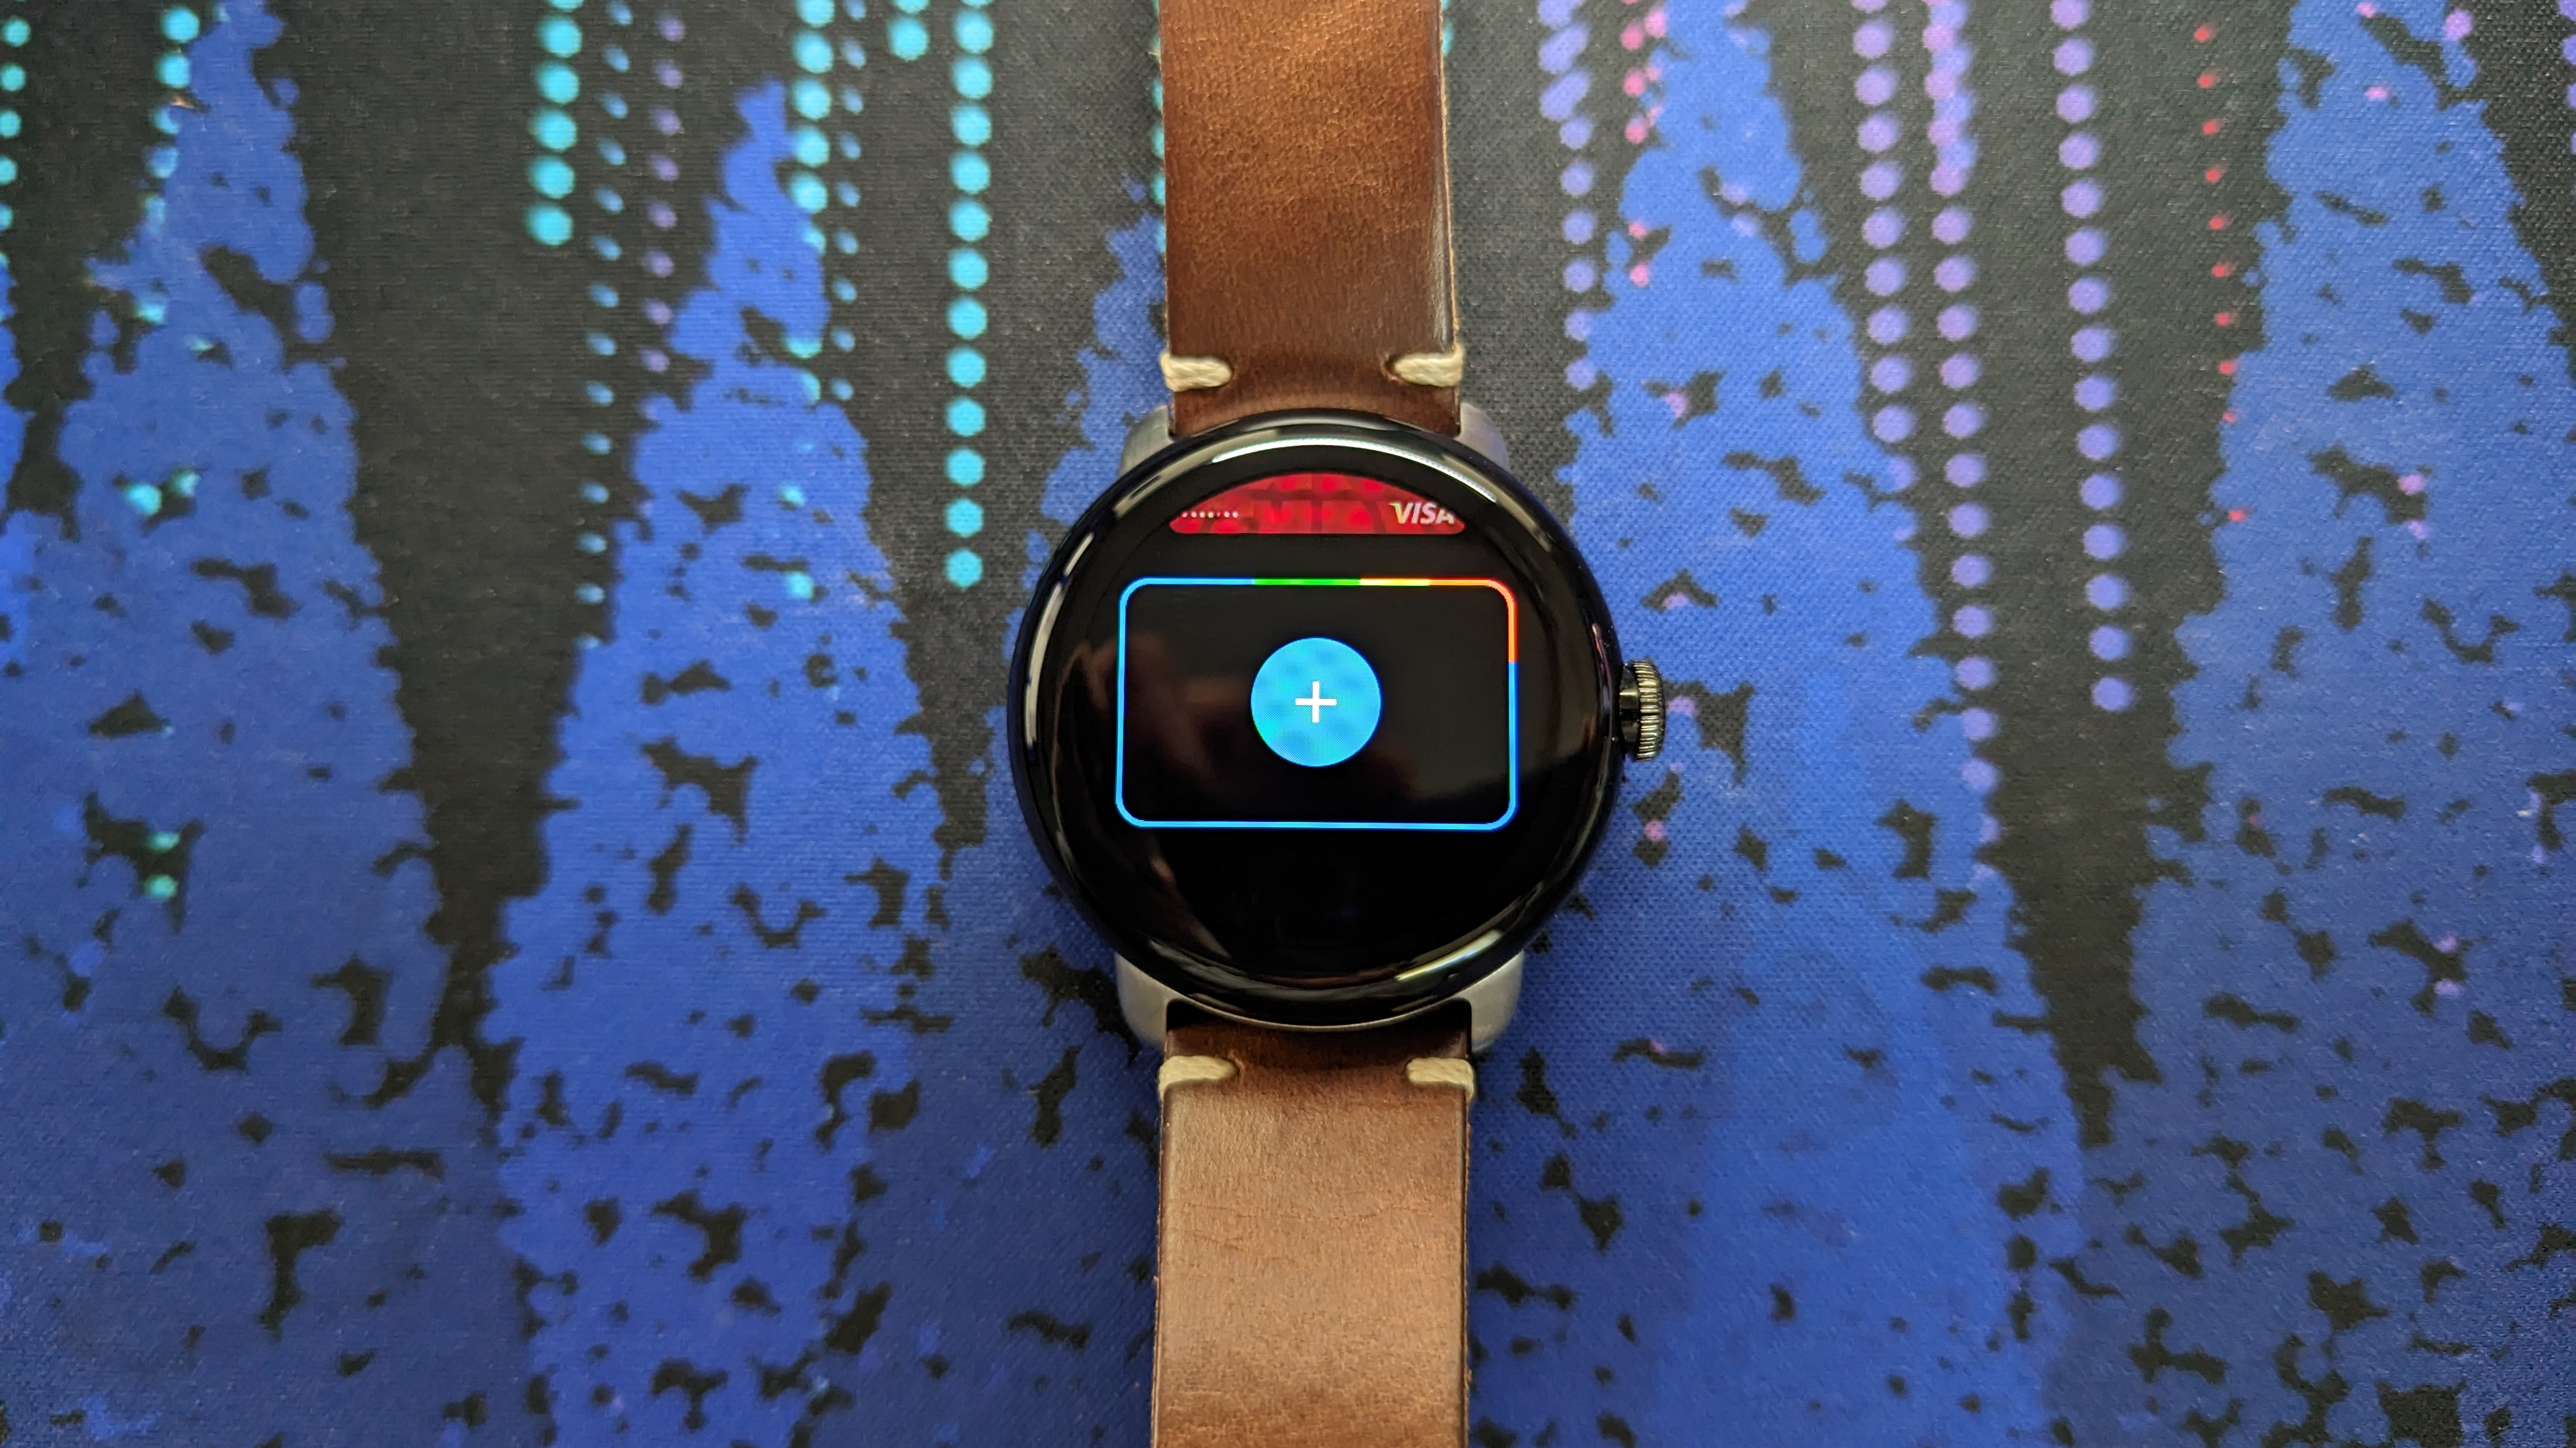 Add new card to Google Wallet on Pixel Watch